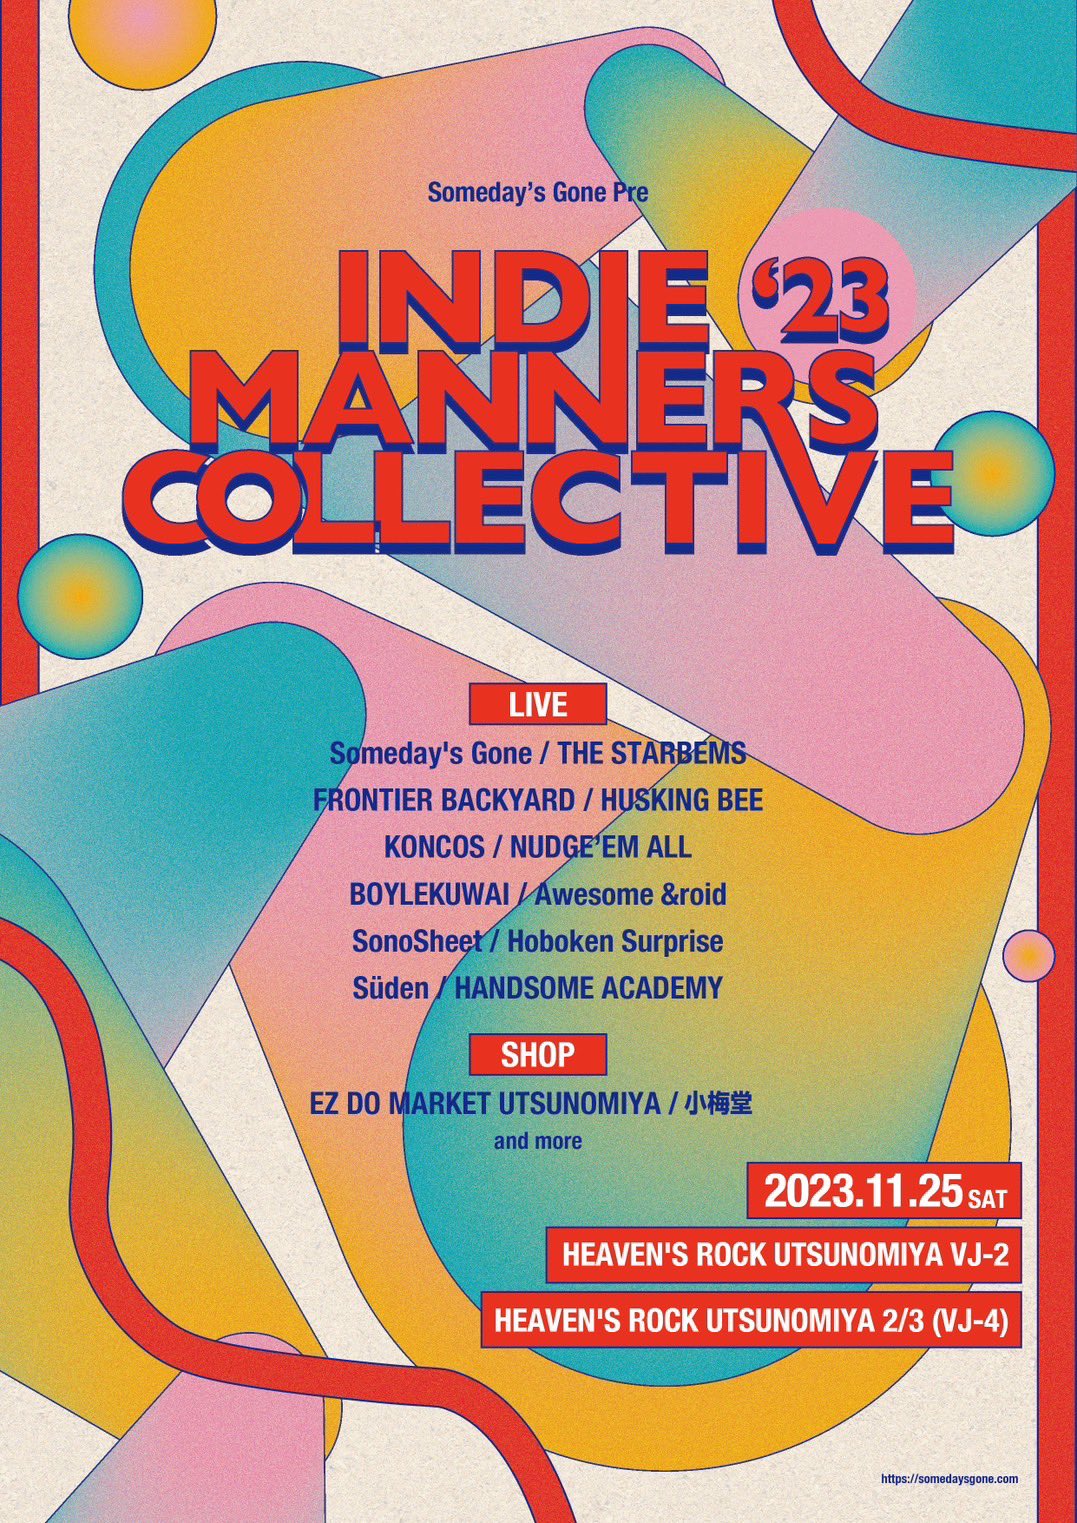 Someday’s Gone presents 2会場サーキット   INDIE MANNERS COLLECTIVE’23